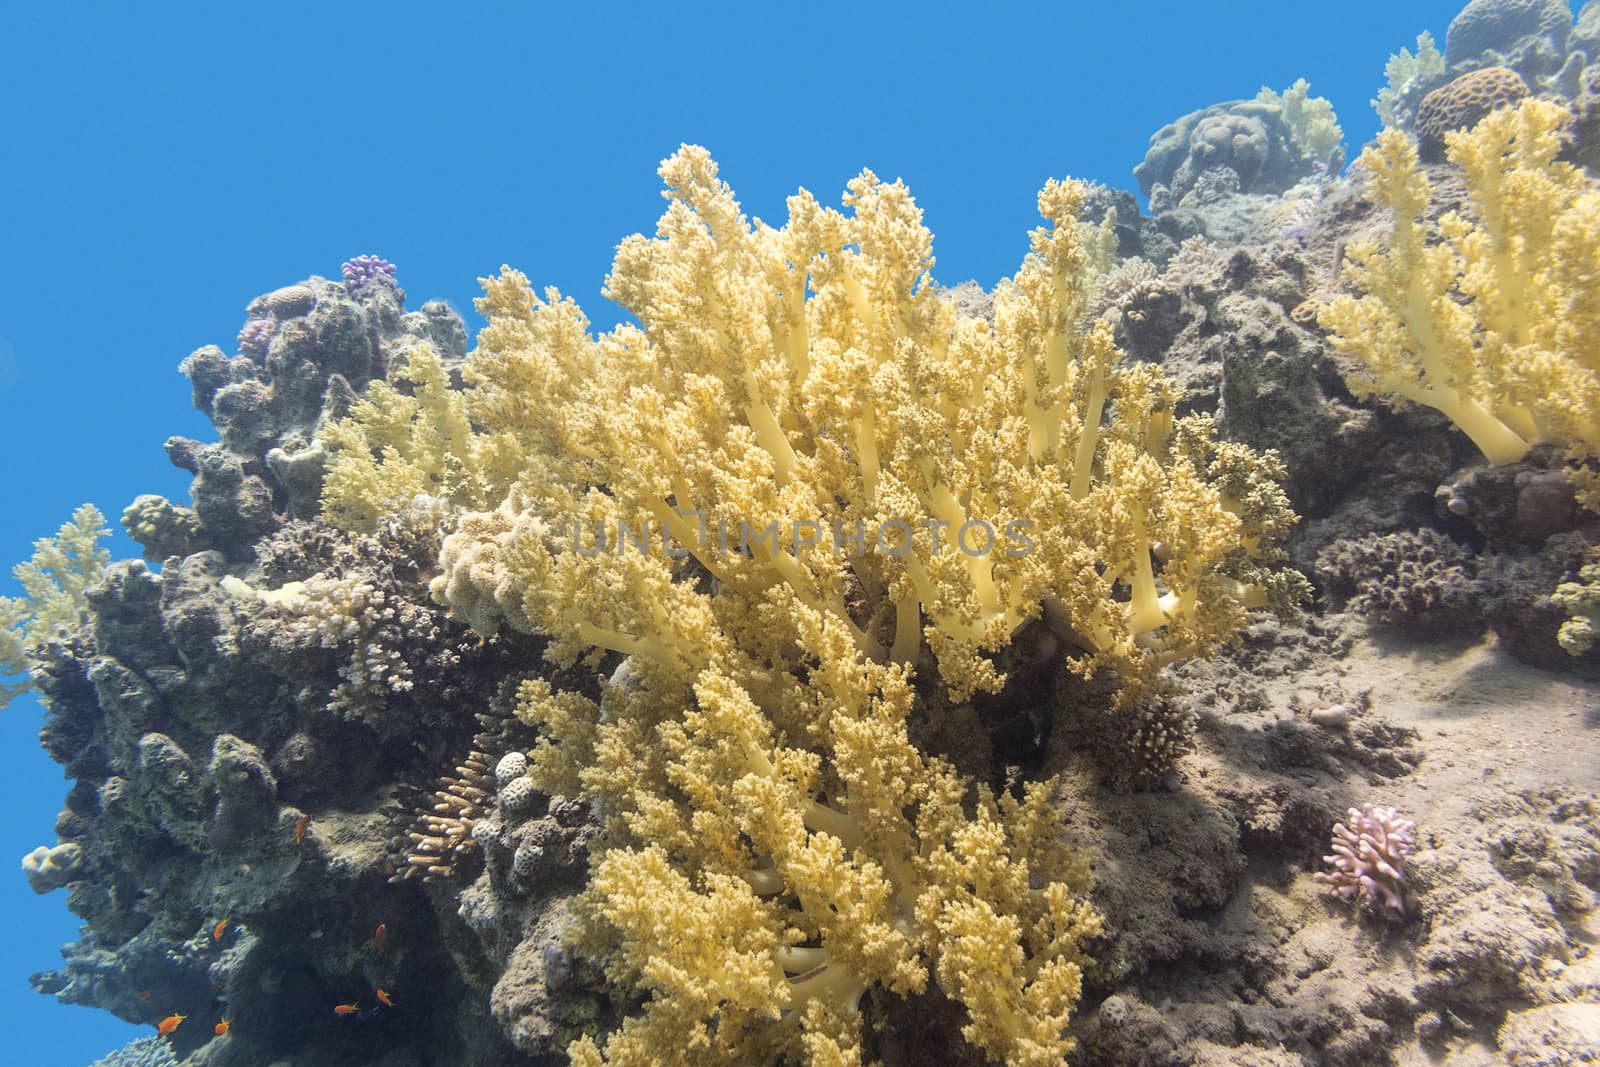 coral reef with yellow broccoli coral at the bottom of tropical sea, underwater.